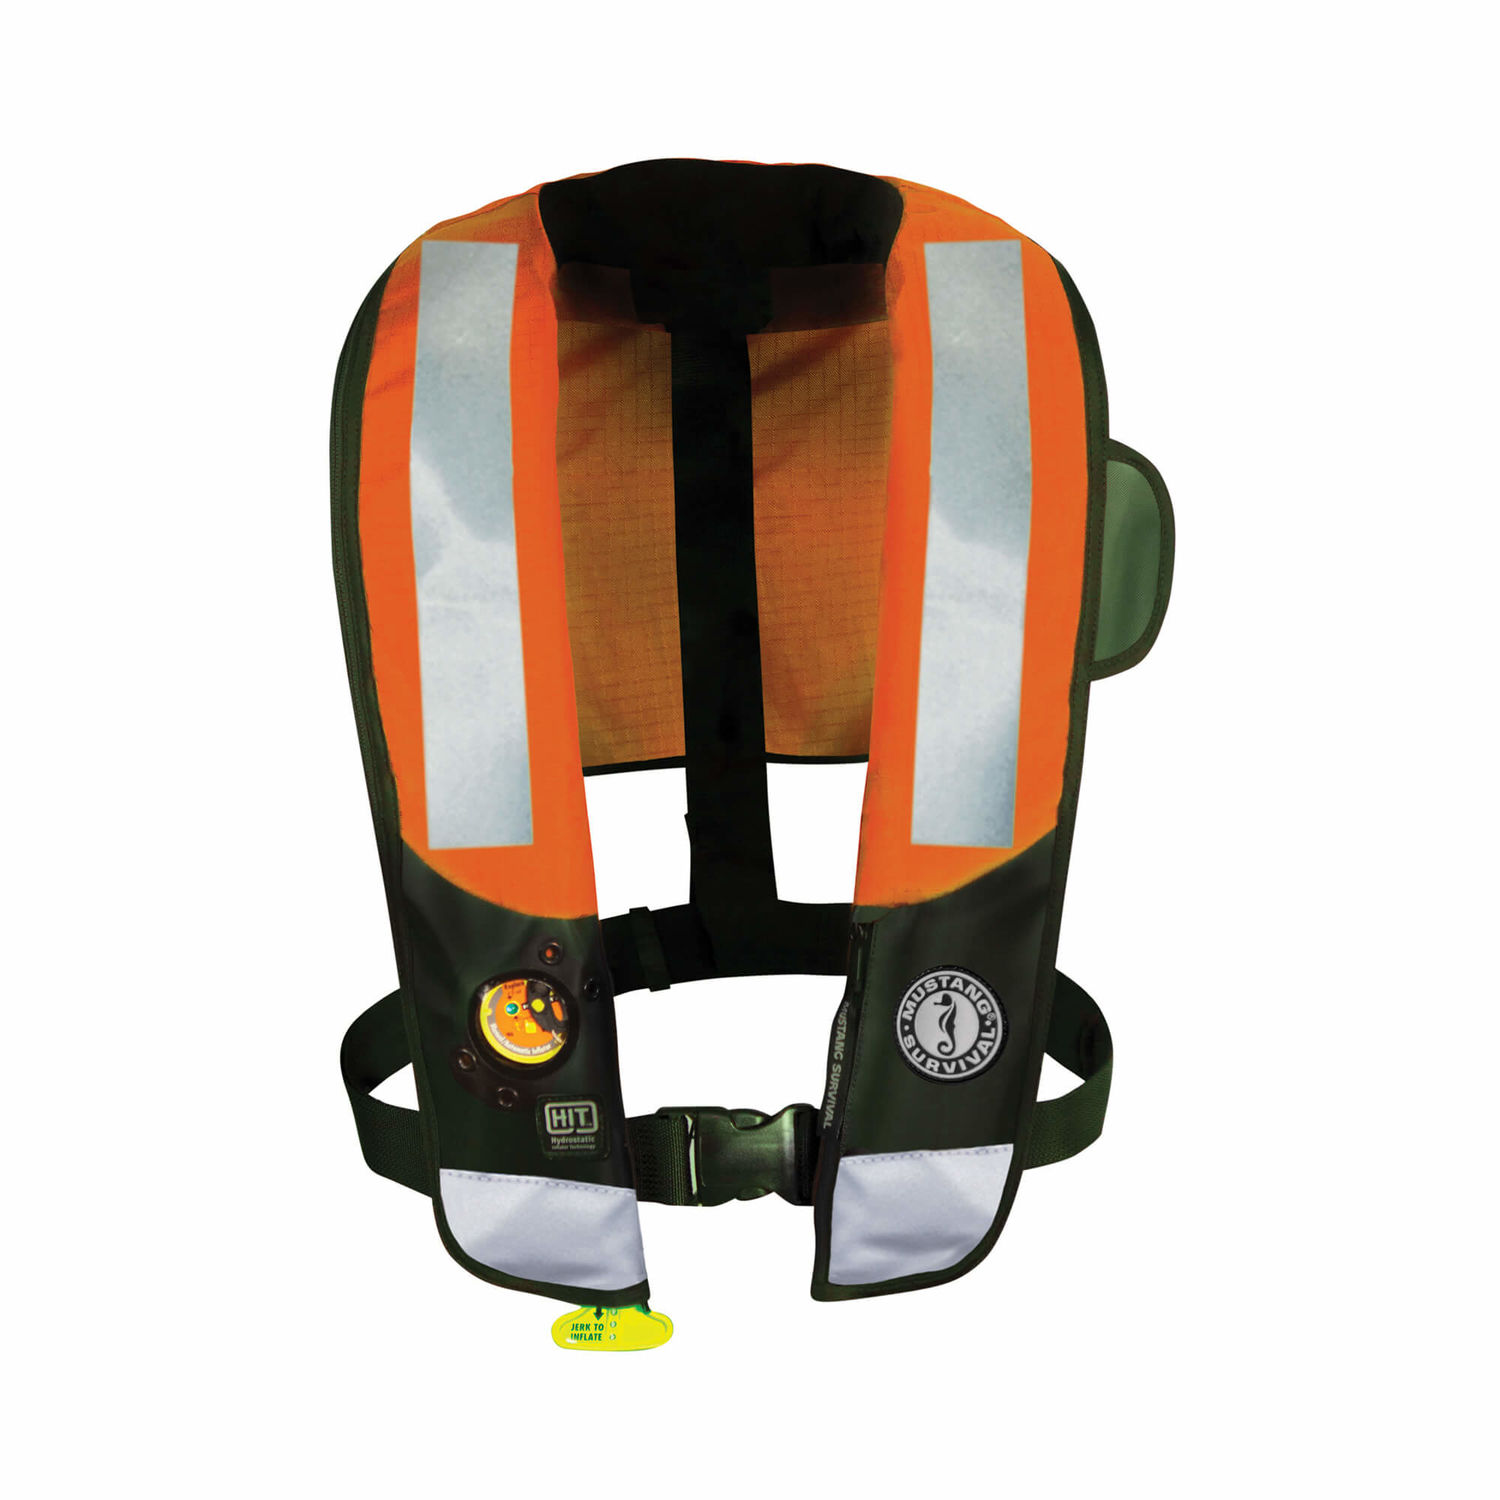 Mustang Survival Inflatable Vest with Solas Reflective tape MD3183